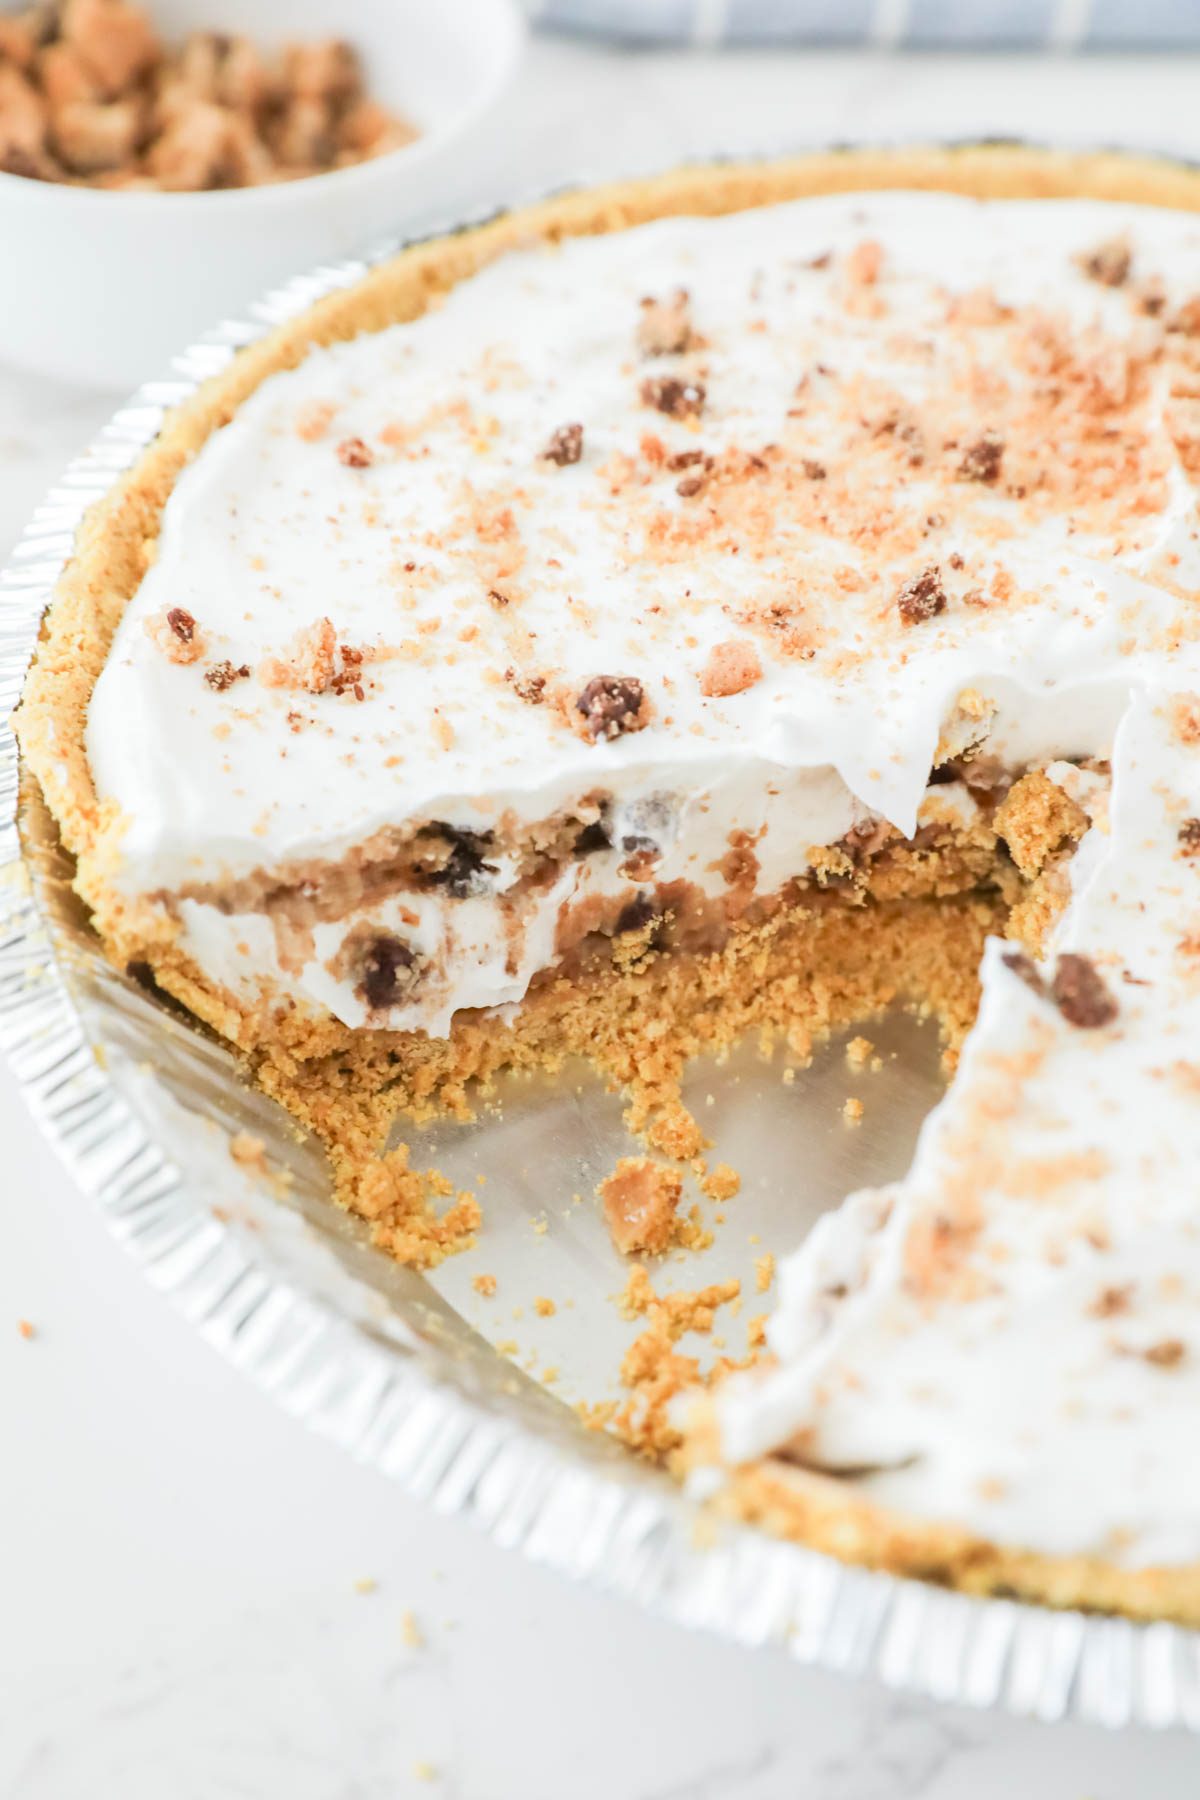 A sliced cream pie with a crumbly crust and a topping of whipped cream and crumbled pieces.